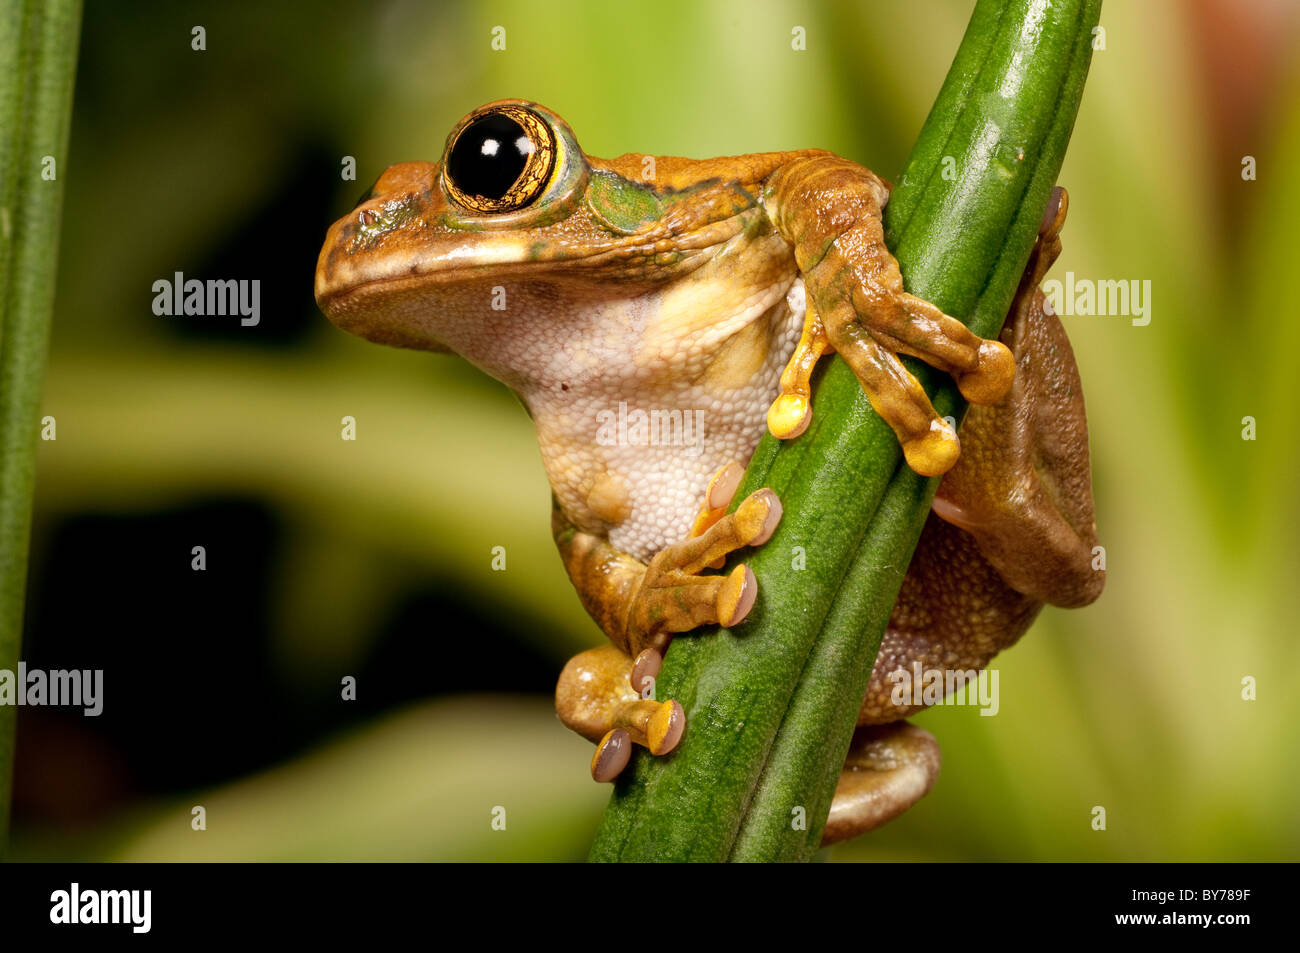 Large Treefrog clinging onto a vertical leaf and looking across the frame Stock Photo